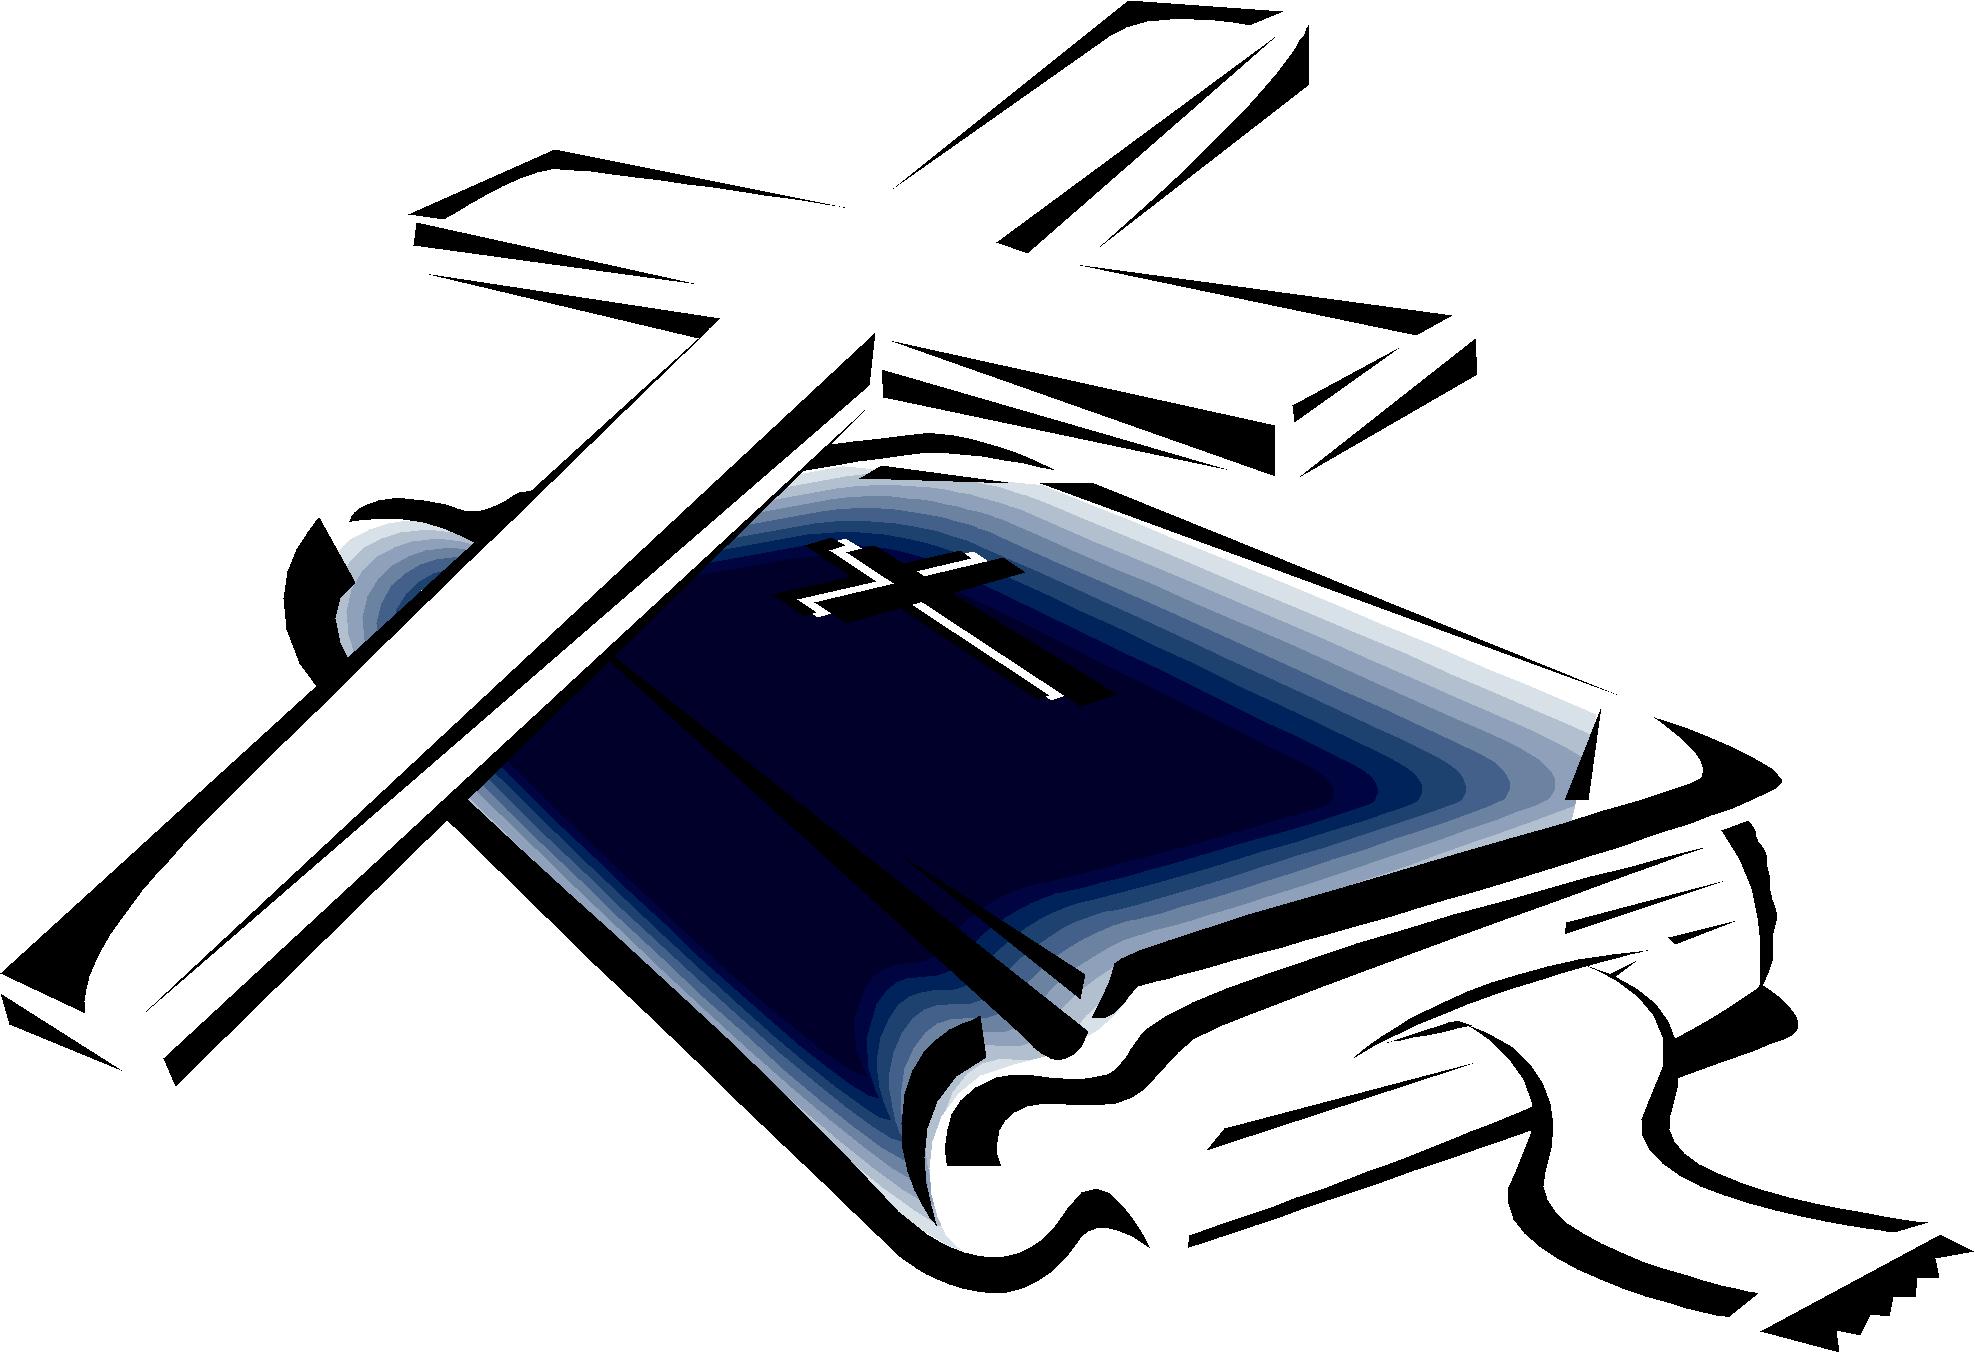 Cross Designs With Bible - ClipArt Best